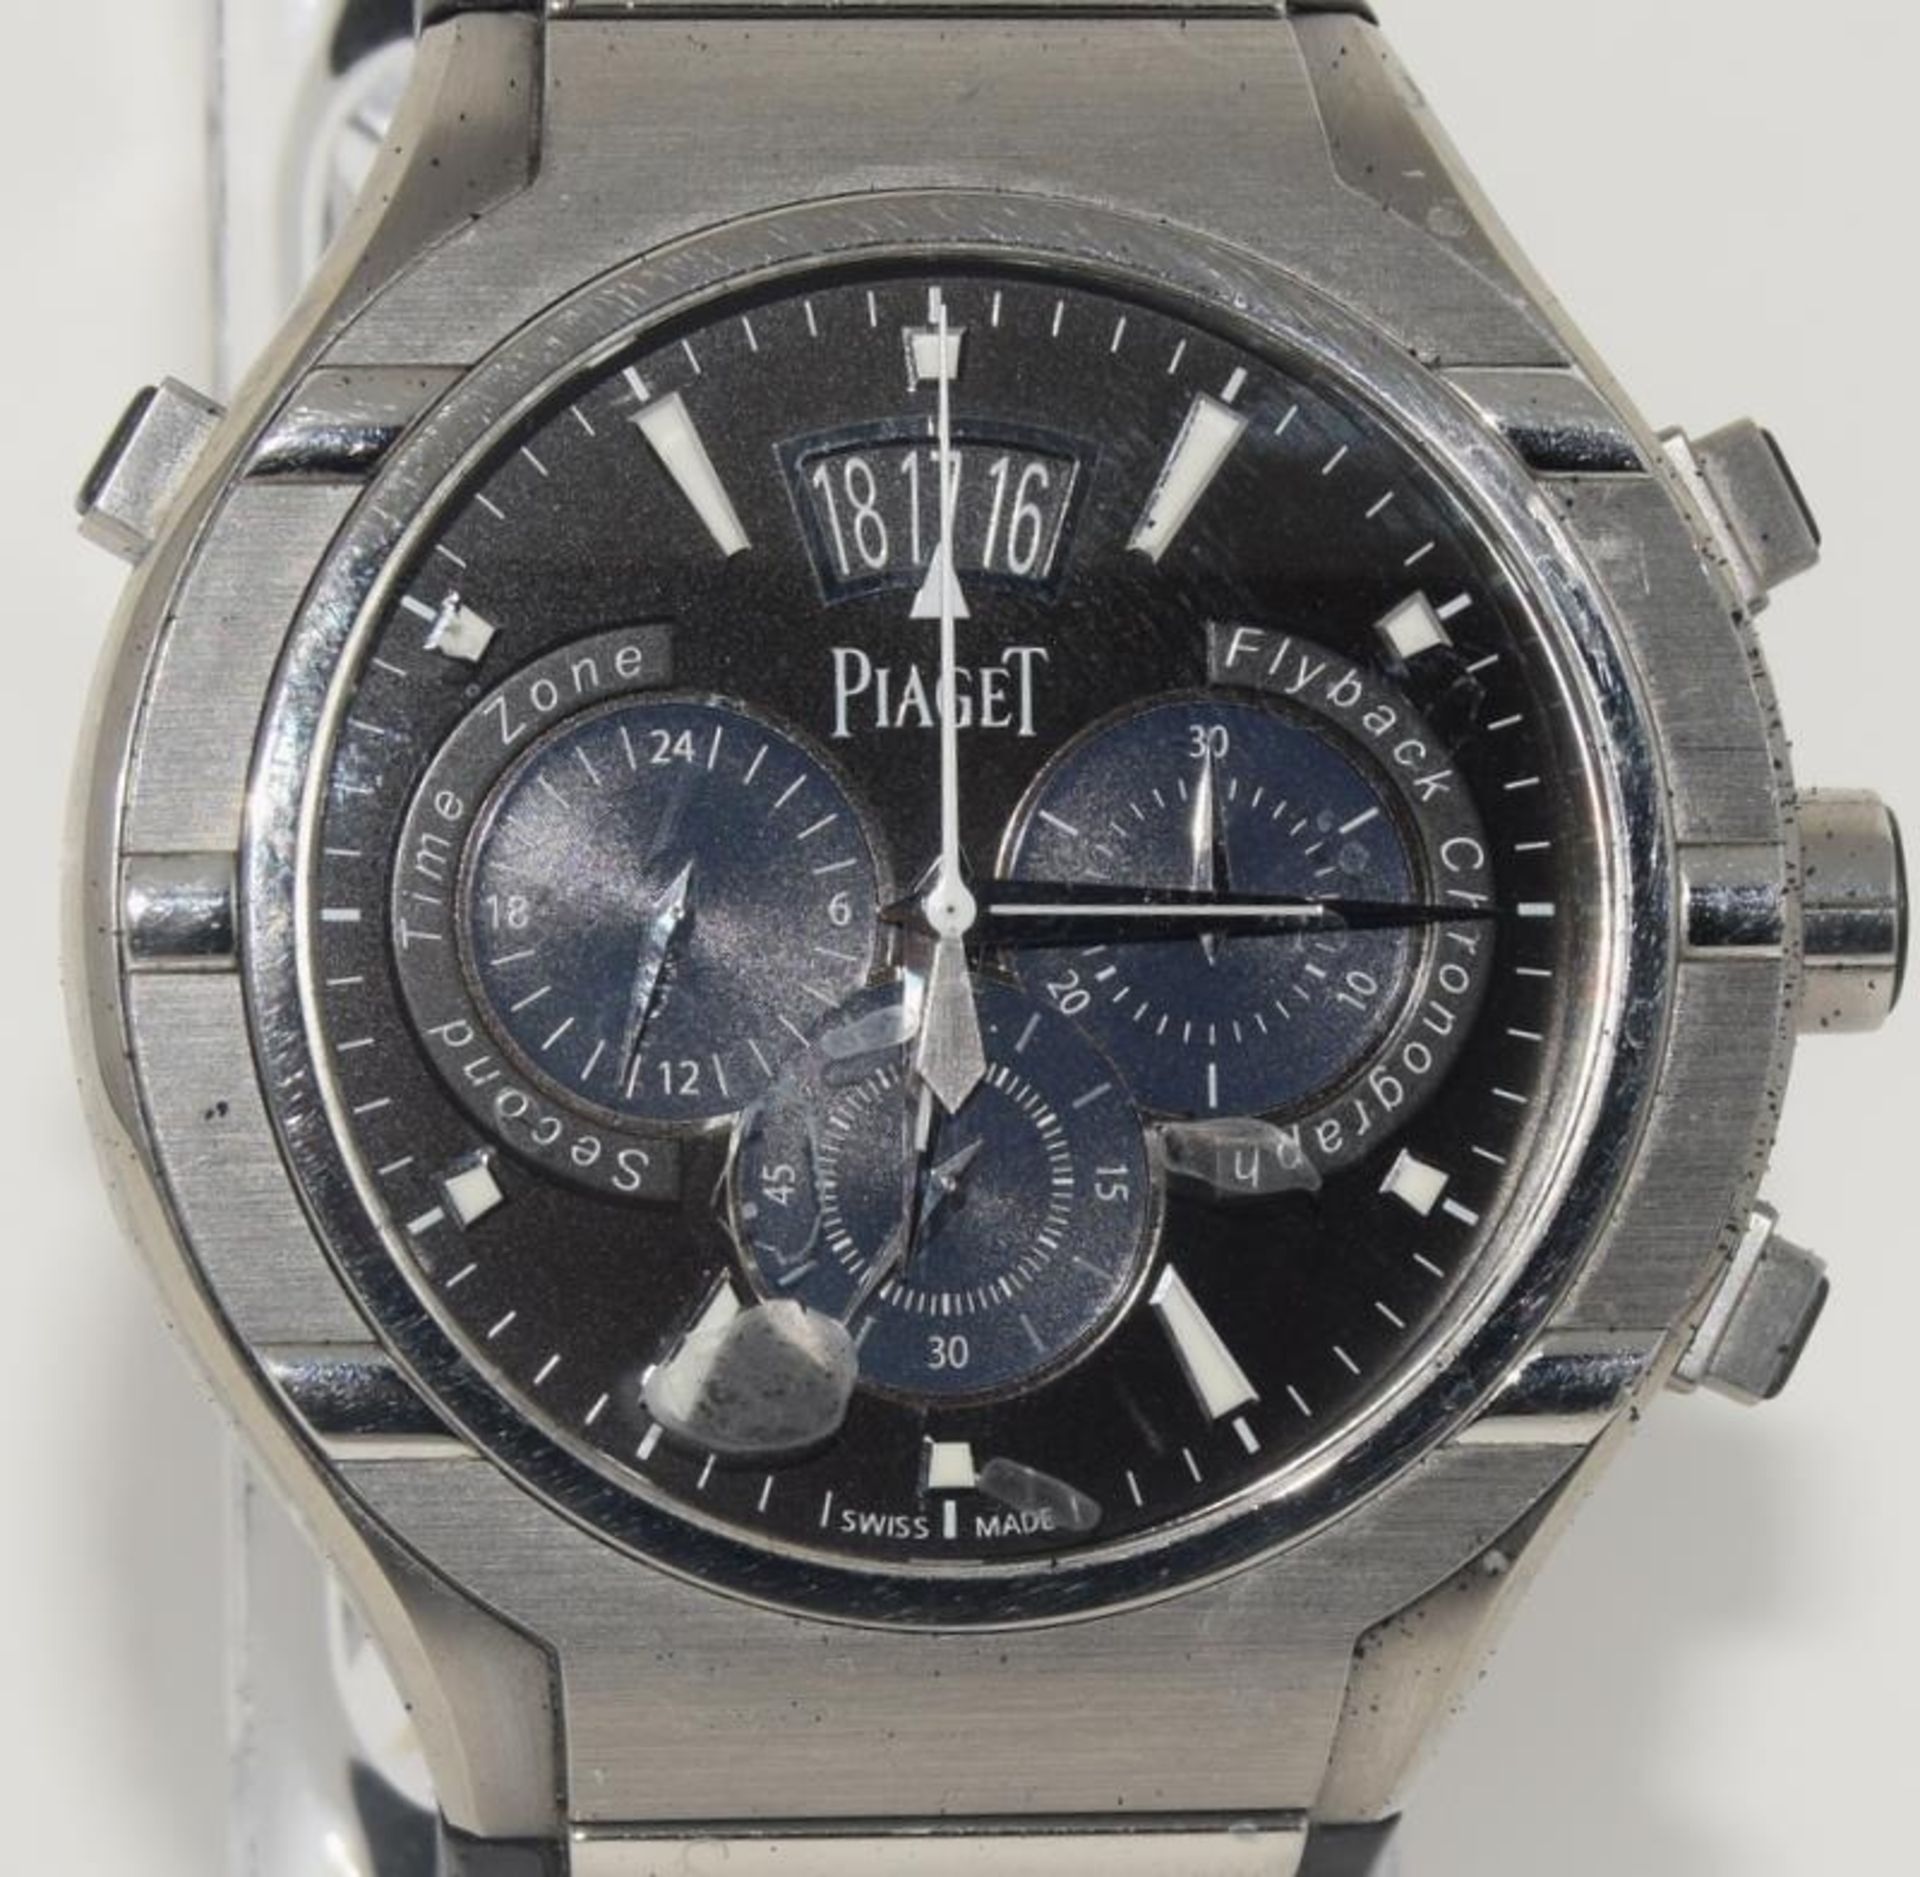 Piaget Titanium chronograph watch with box and original paper work - Image 5 of 10